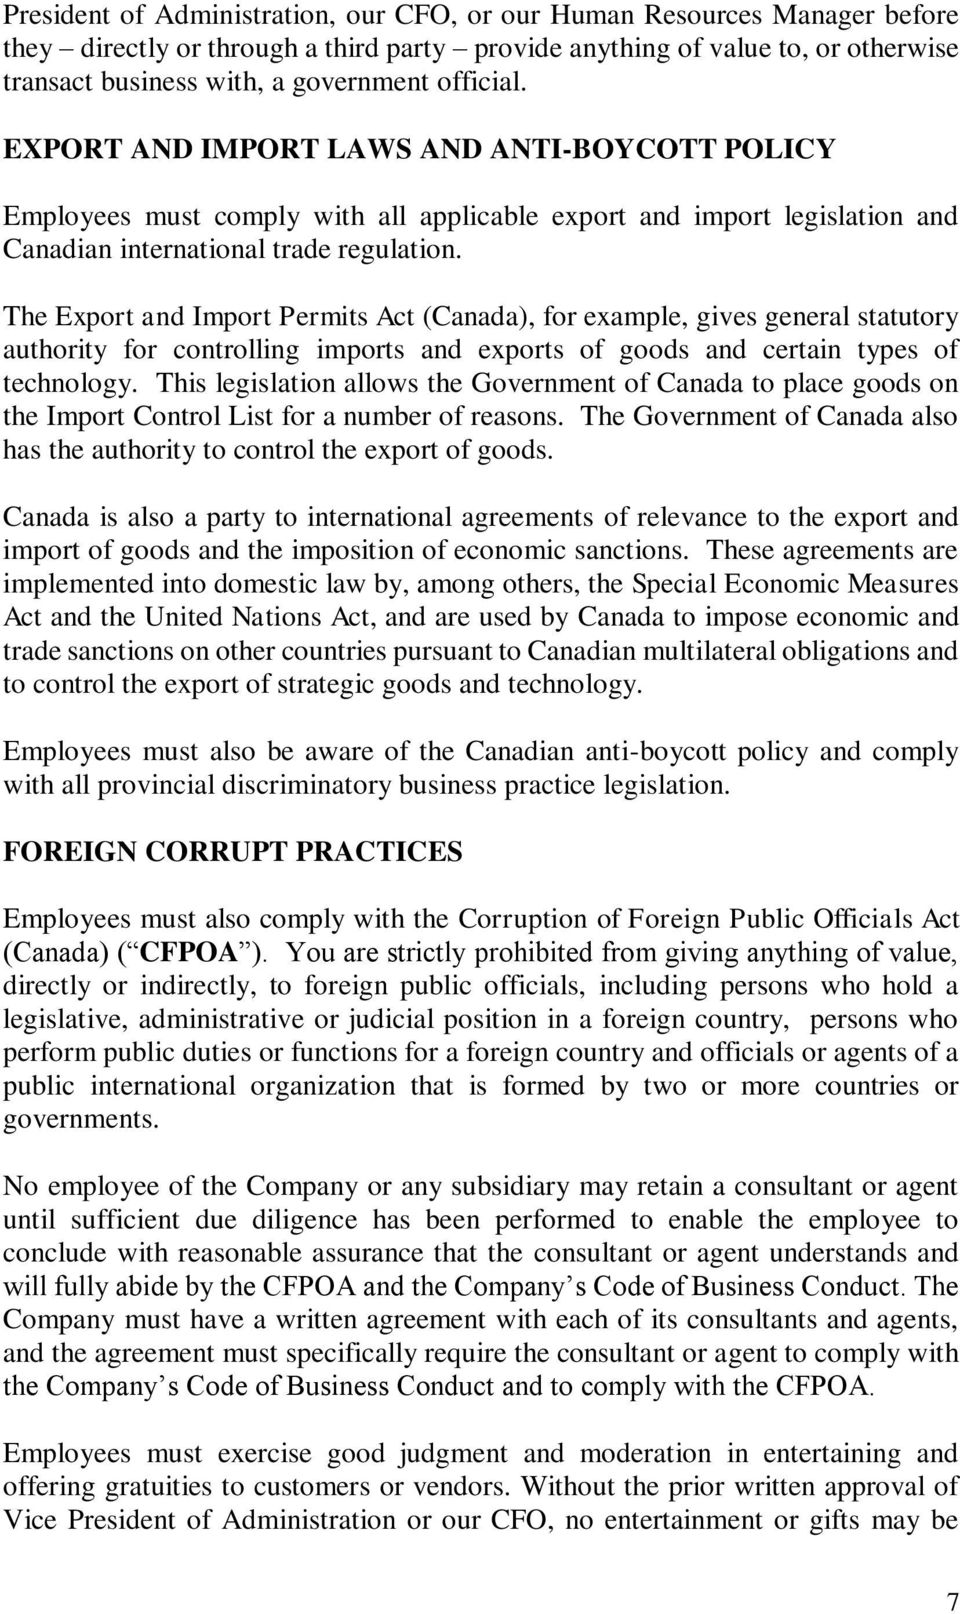 The Export and Import Permits Act (Canada), for example, gives general statutory authority for controlling imports and exports of goods and certain types of technology.